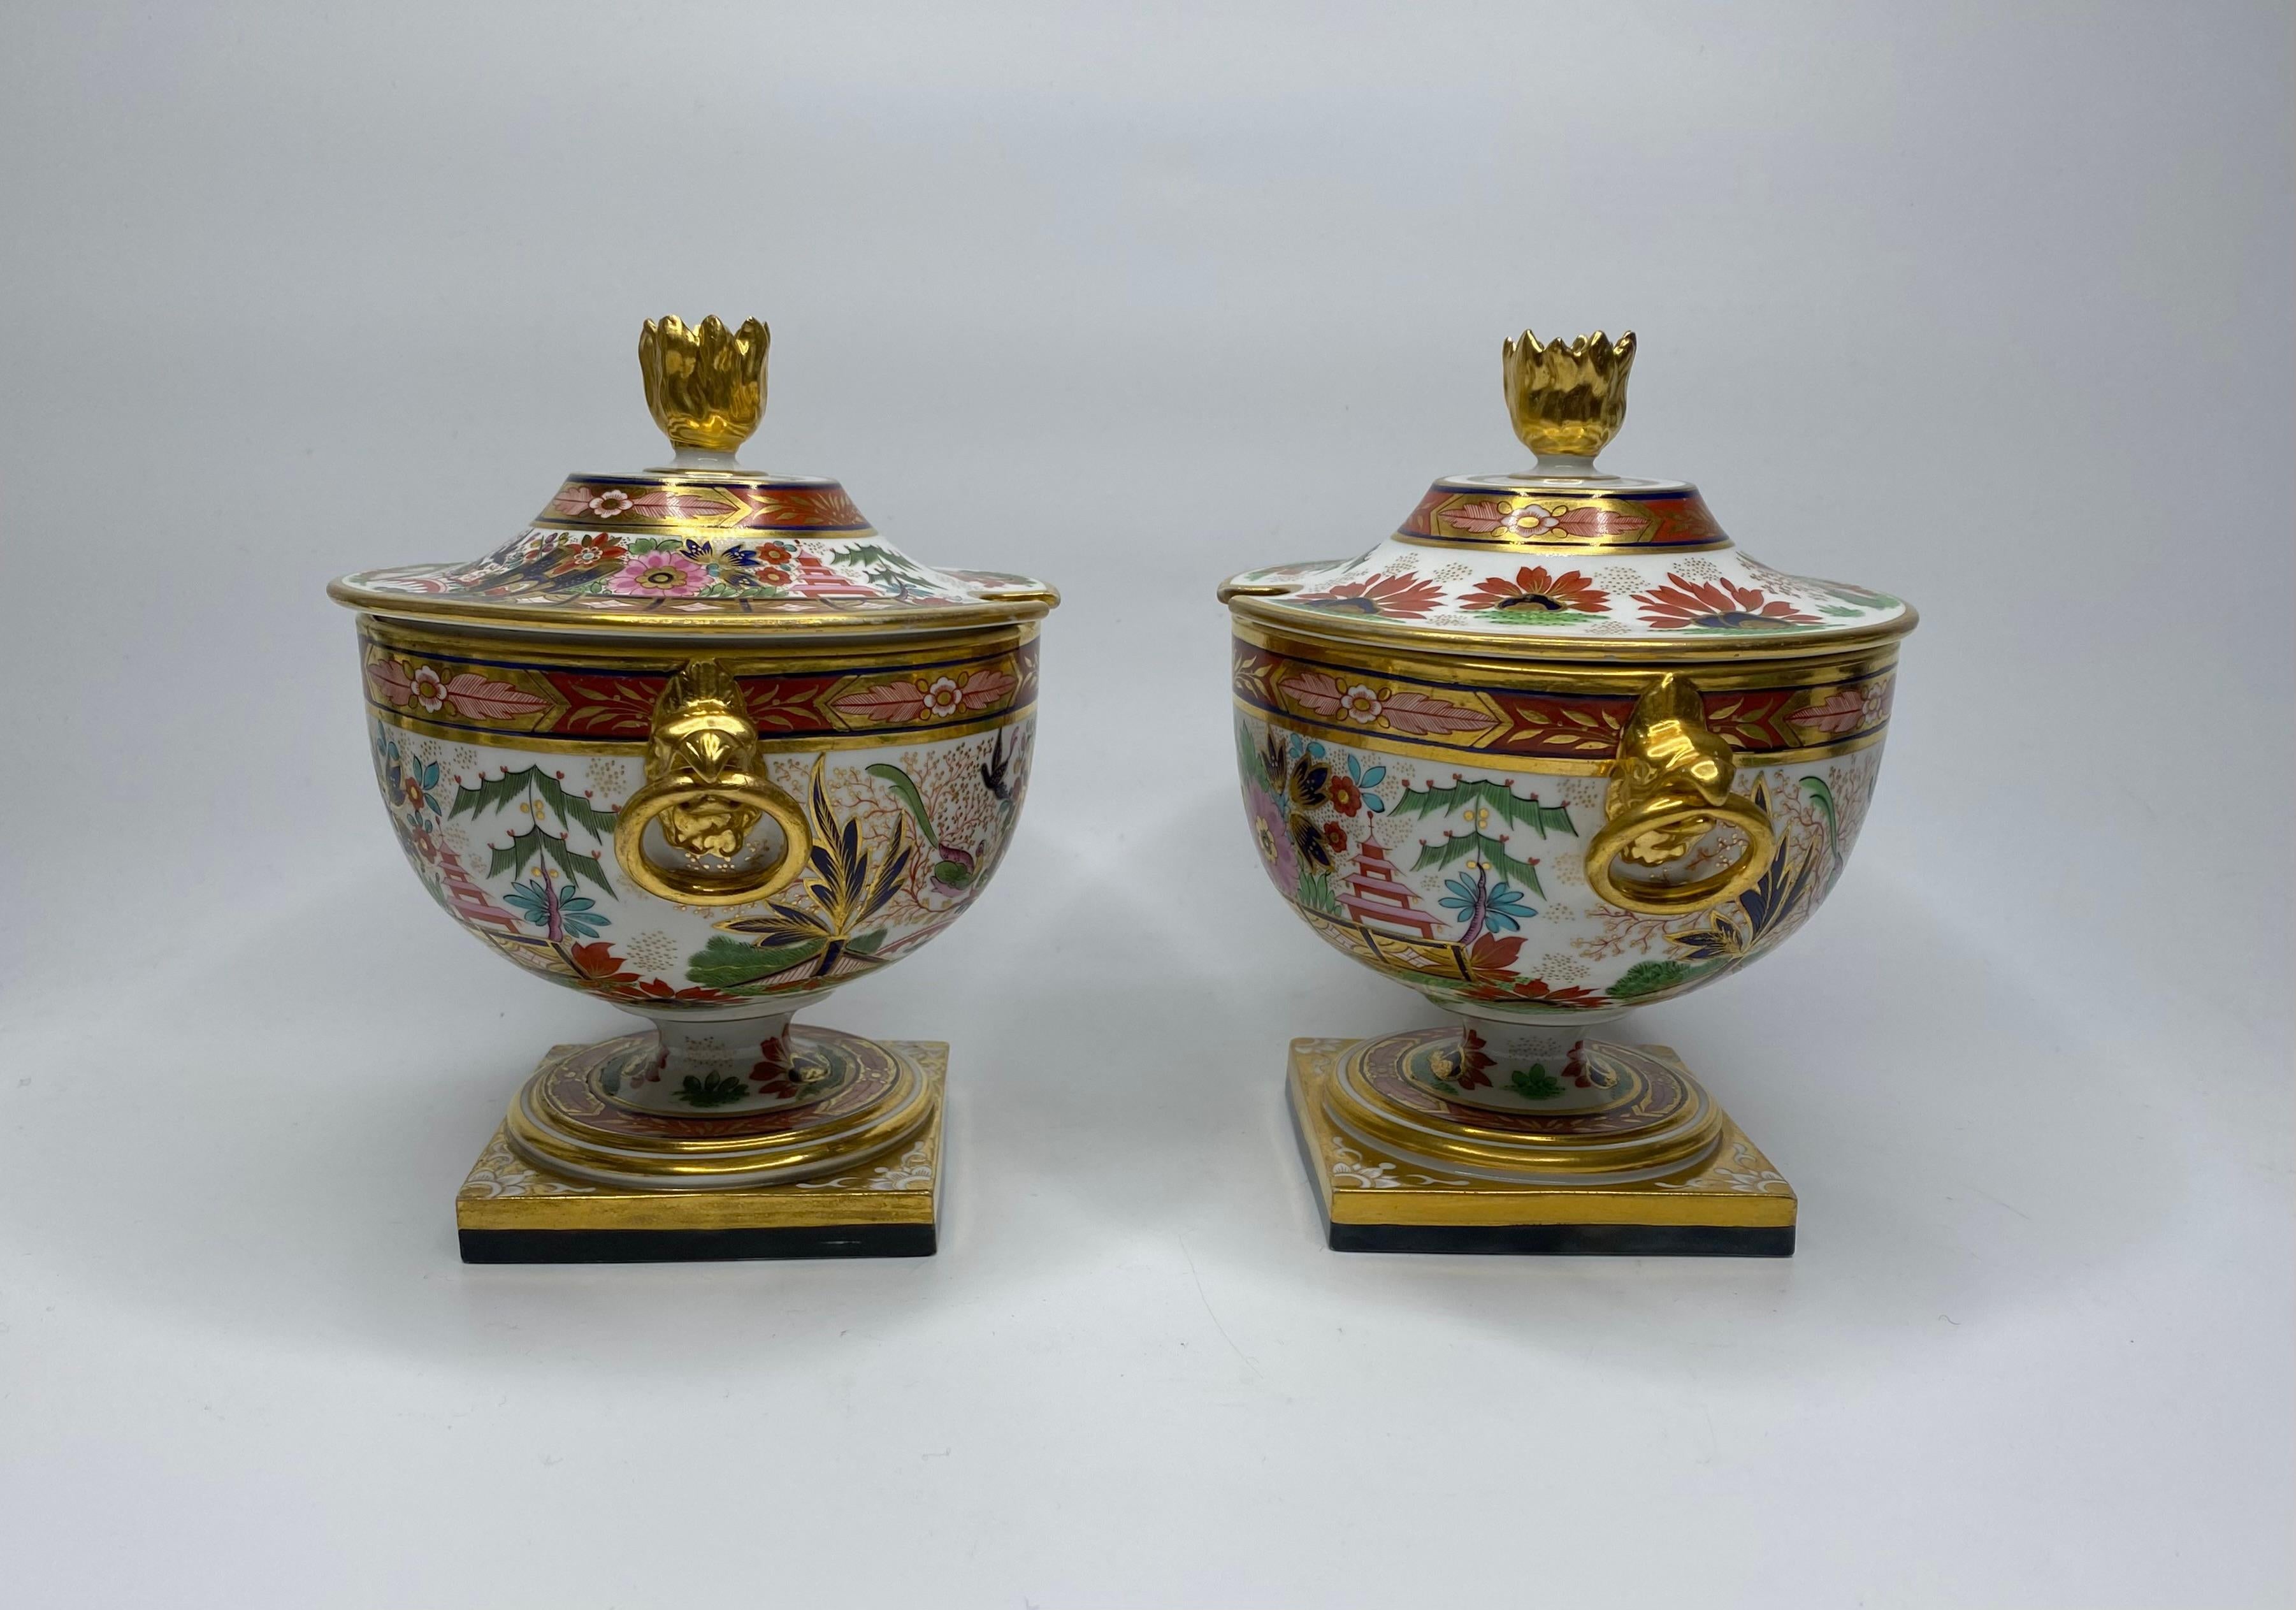 An exceptionally fine pair of Barr, Flight and Barr Worcester porcelain sauce tureens, and covers, c. 1810.
Both urn form tureens moulded with twin gilt eagle mask handles, holding circular rings, and set upon square pedestal bases. Hand painted in